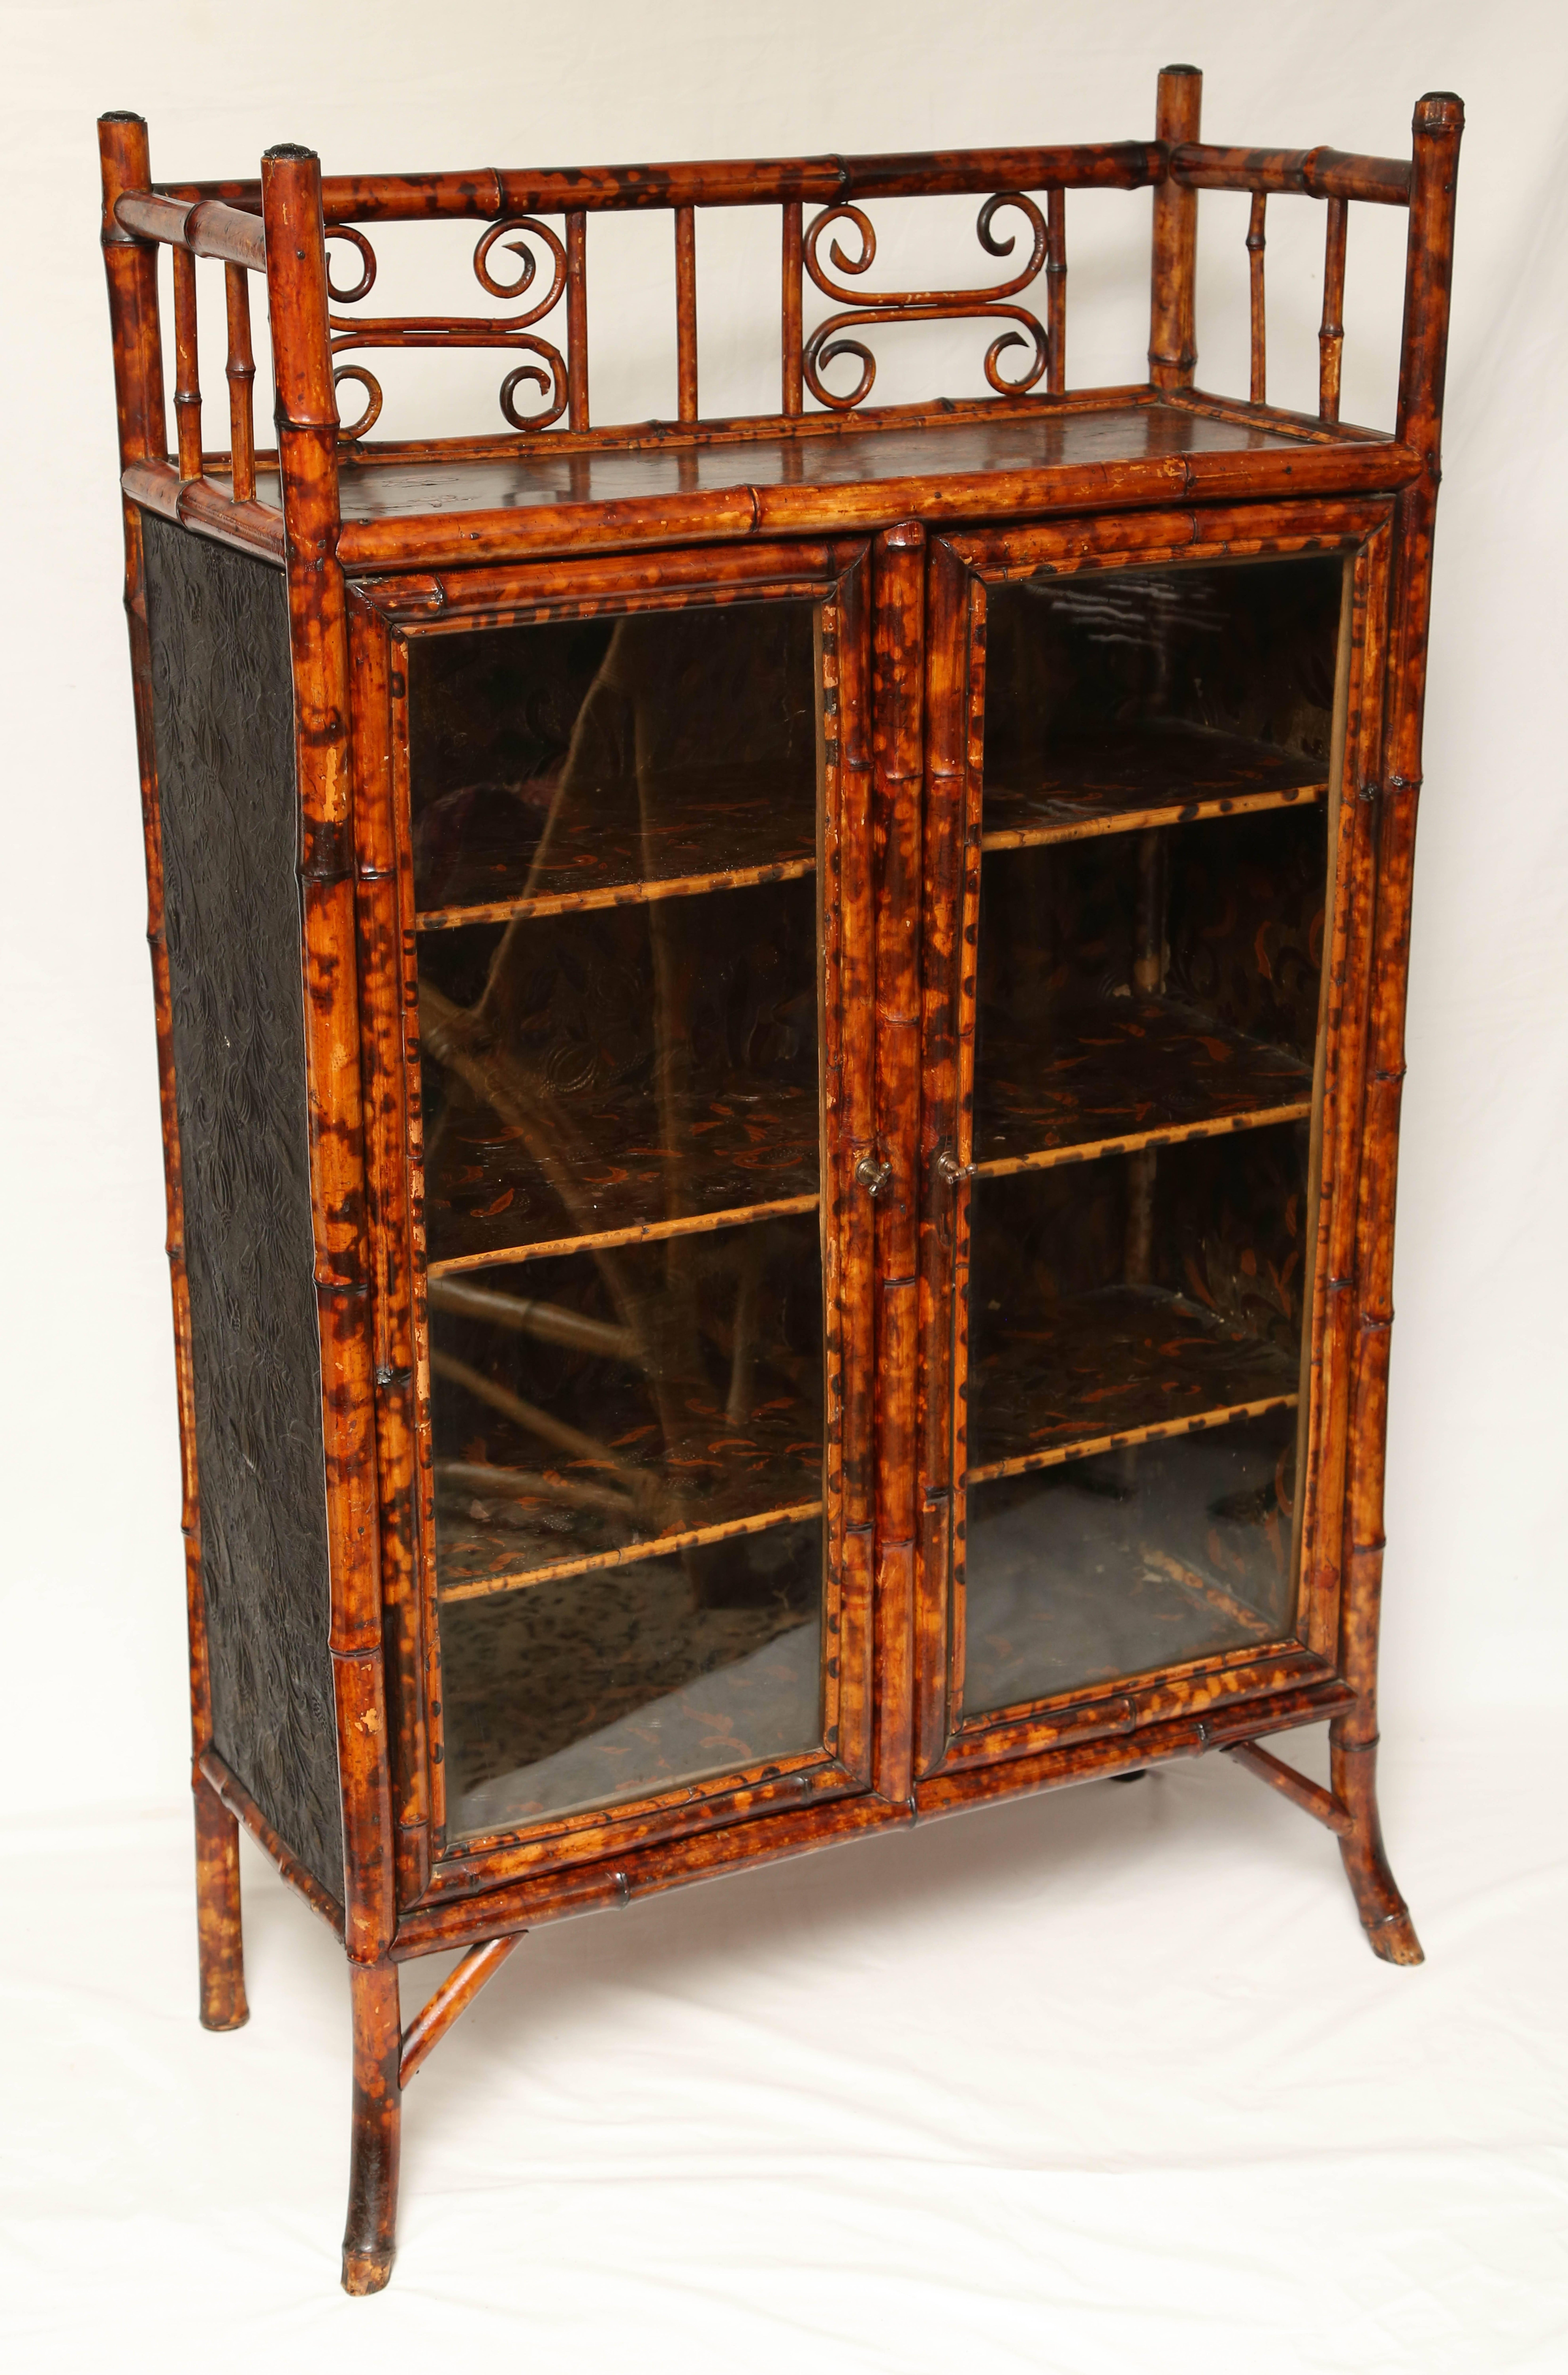 A very nice English bamboo cabinet with two doors glass with shelves, leather paper and japanning lacquer.